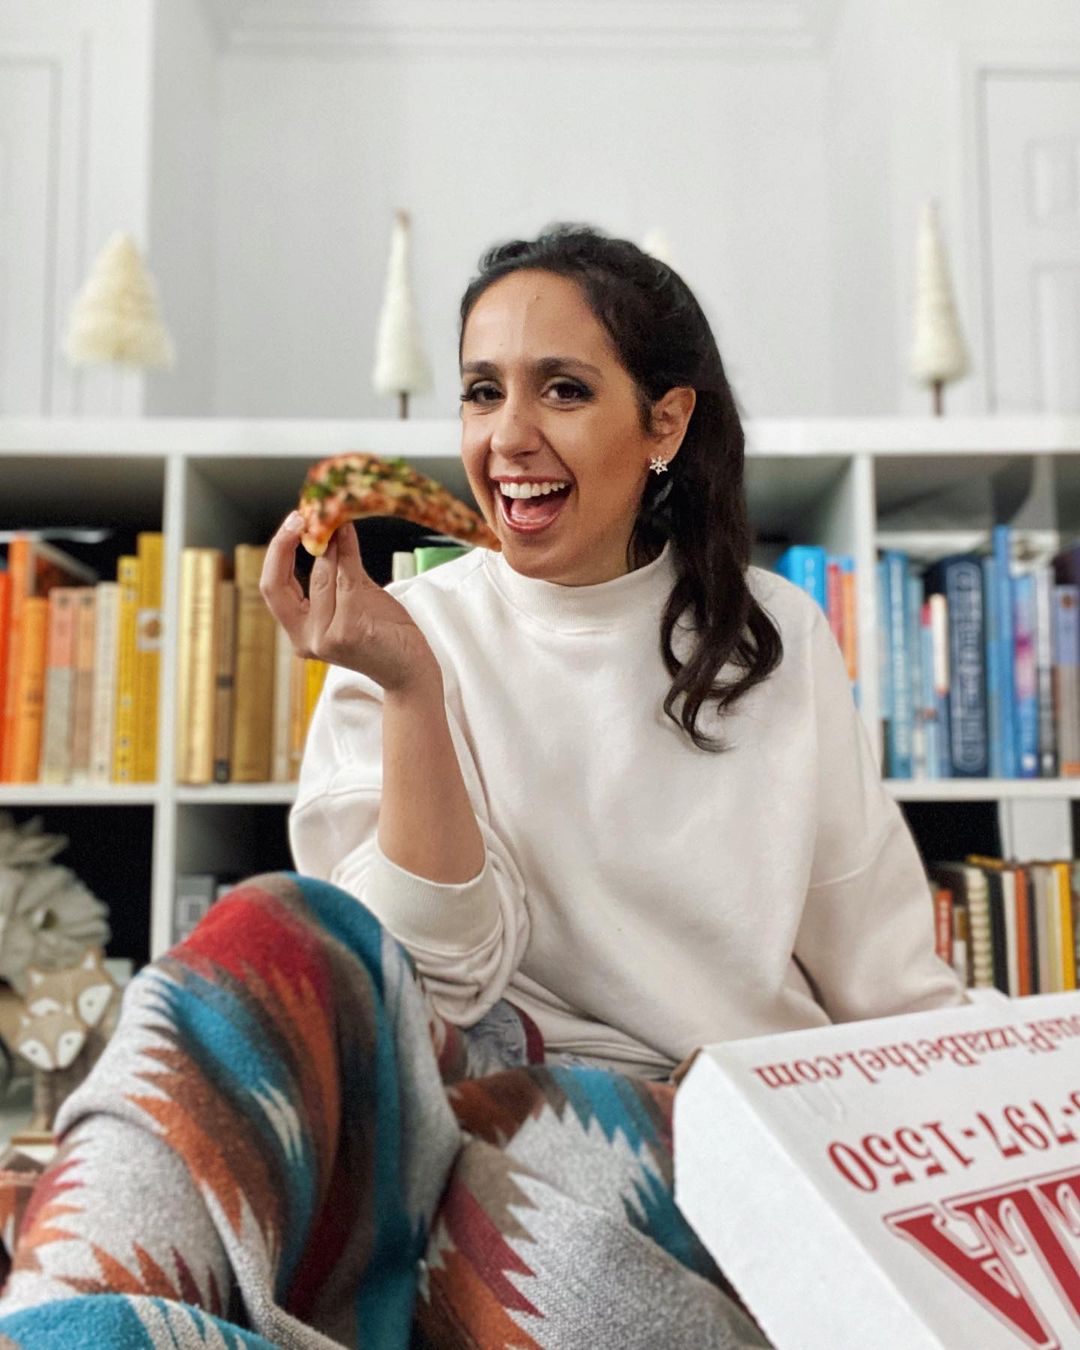 Gabrielle is sitting in front of a bookshelf with books in rainbow order eating a piece of pizza and laughing. Gabrielle is a white woman with long brown hair in a ponytail, wearing a white sweatshirt and a blanket from Mini Tipi, an awesome indigenous-owned company I highly recommend you check out.